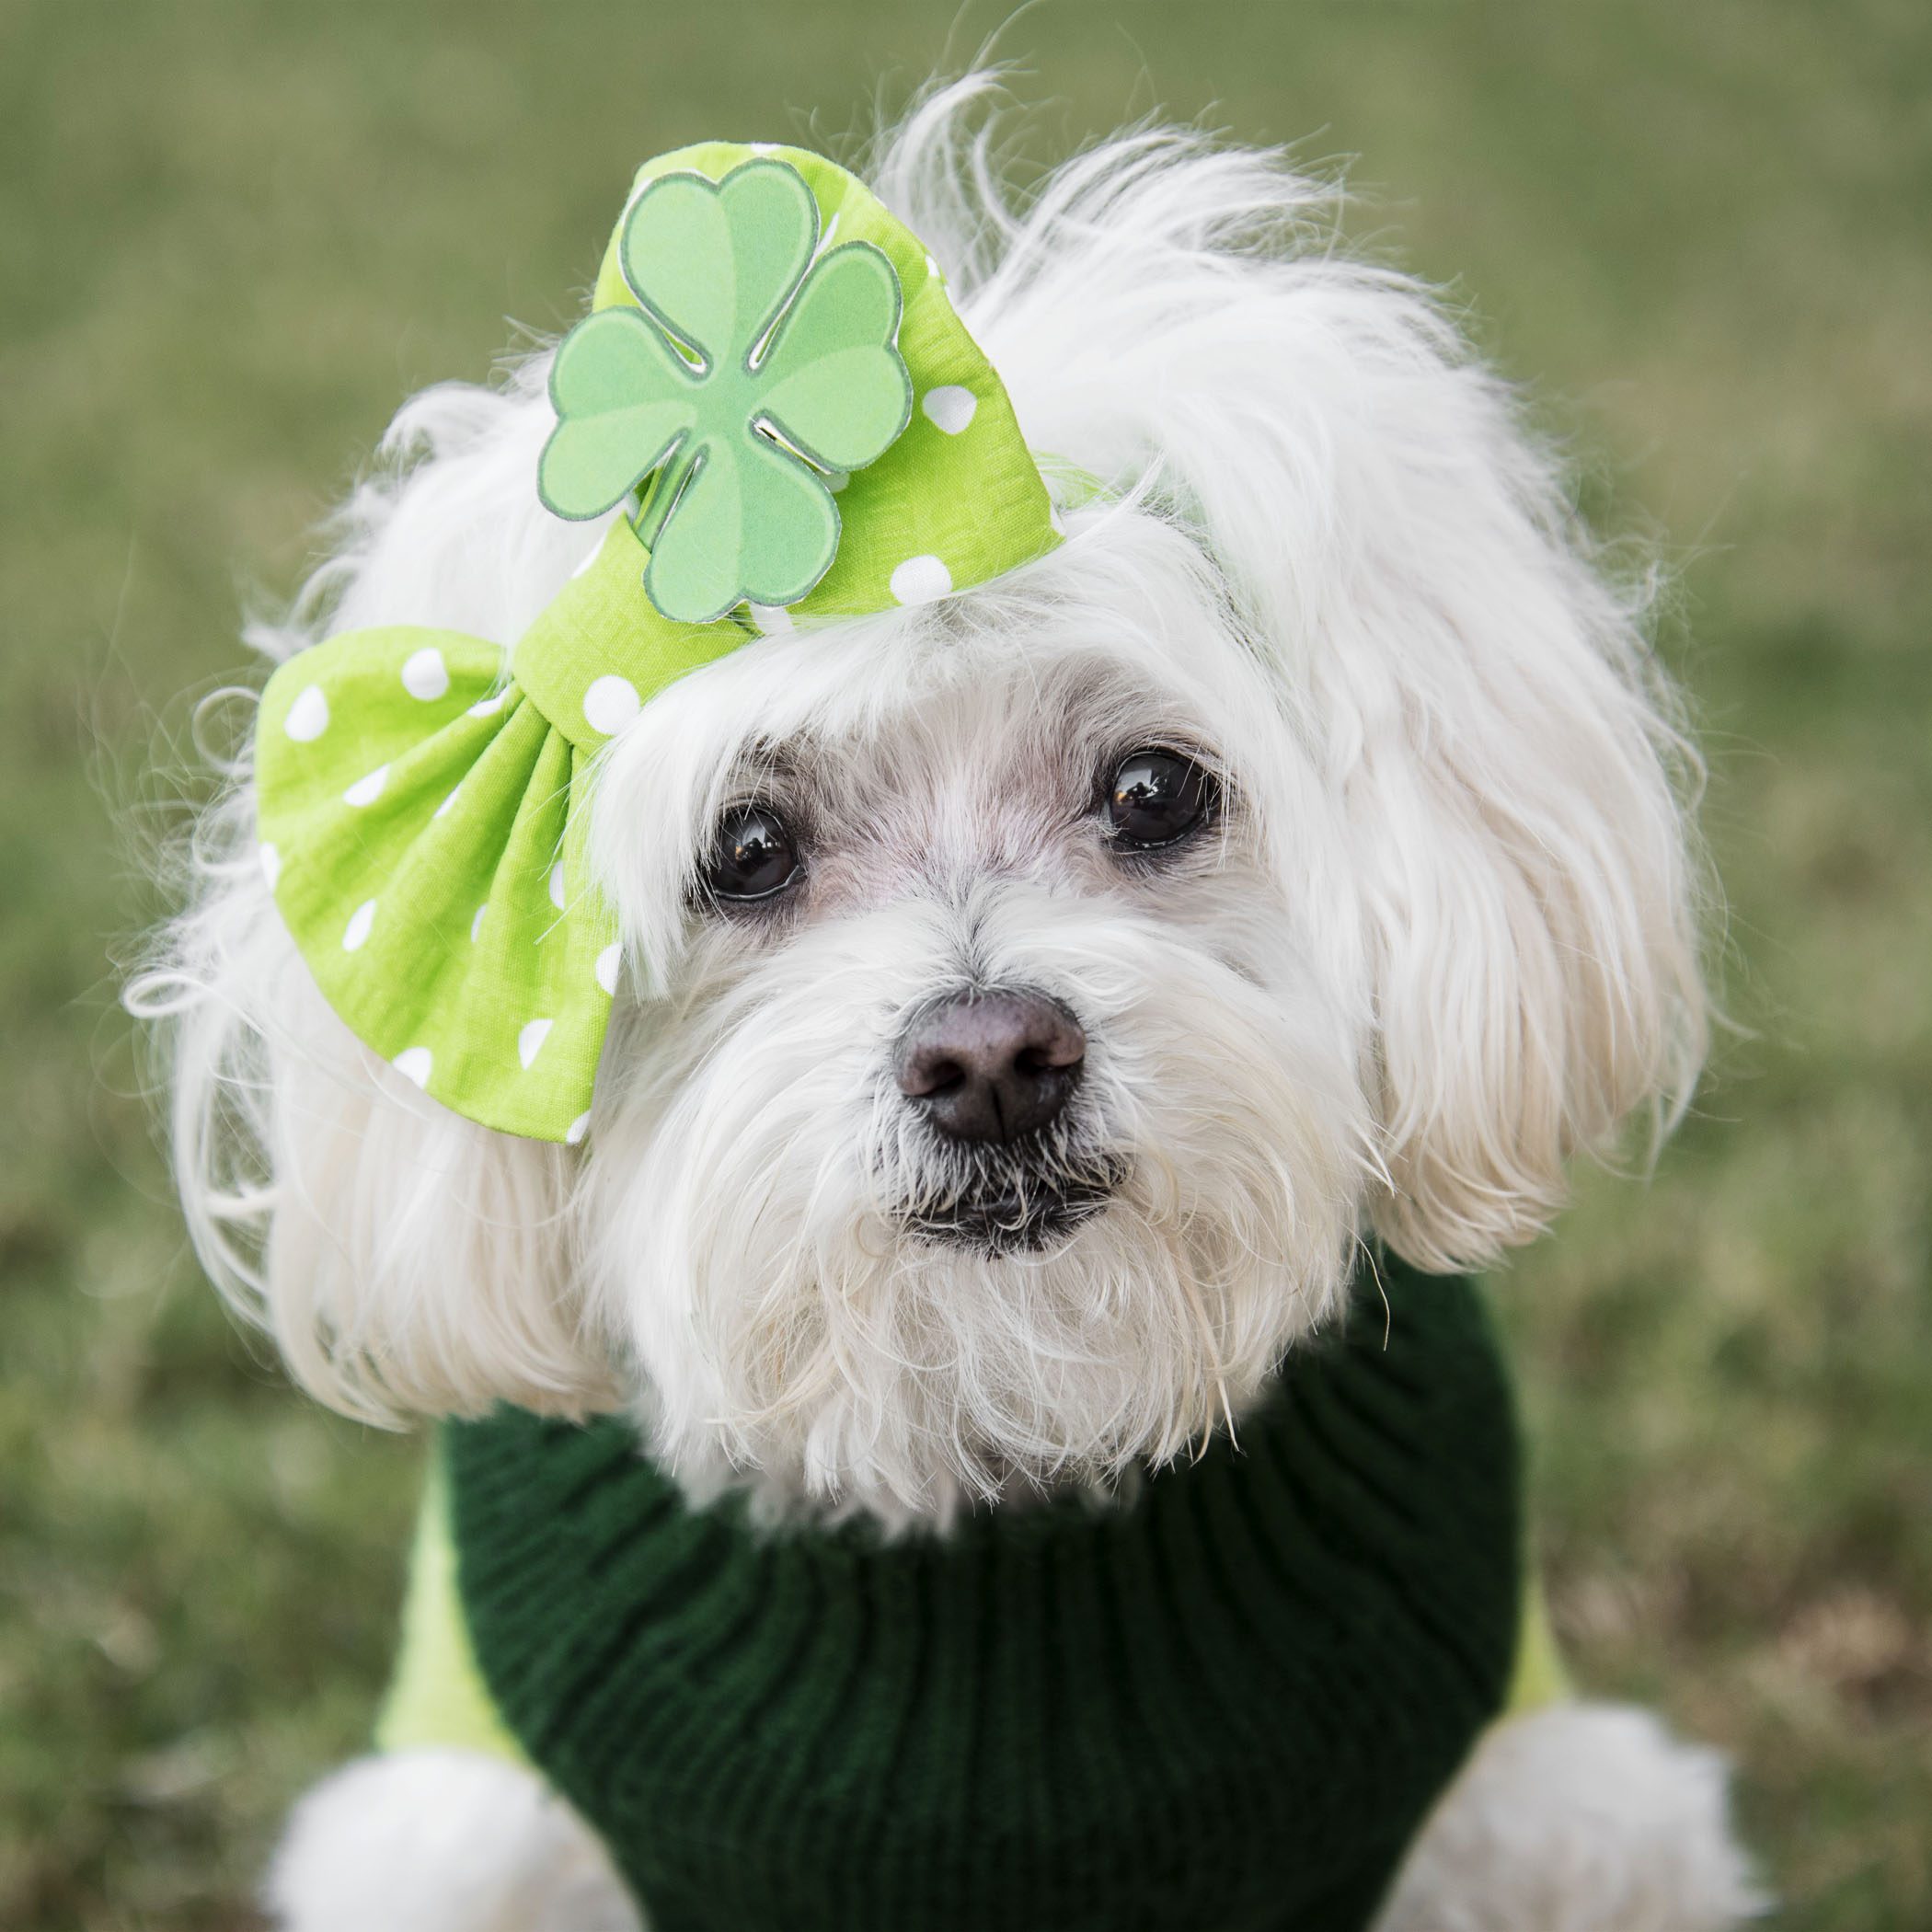  I told Mom there was no way I was wearing a top hat and bow tie, so she had to get creative with a little diva flare for our shared St Patty’s day attire! Mom says I look uber fabulous and oh so sweet, so I guess her creativity worked! 